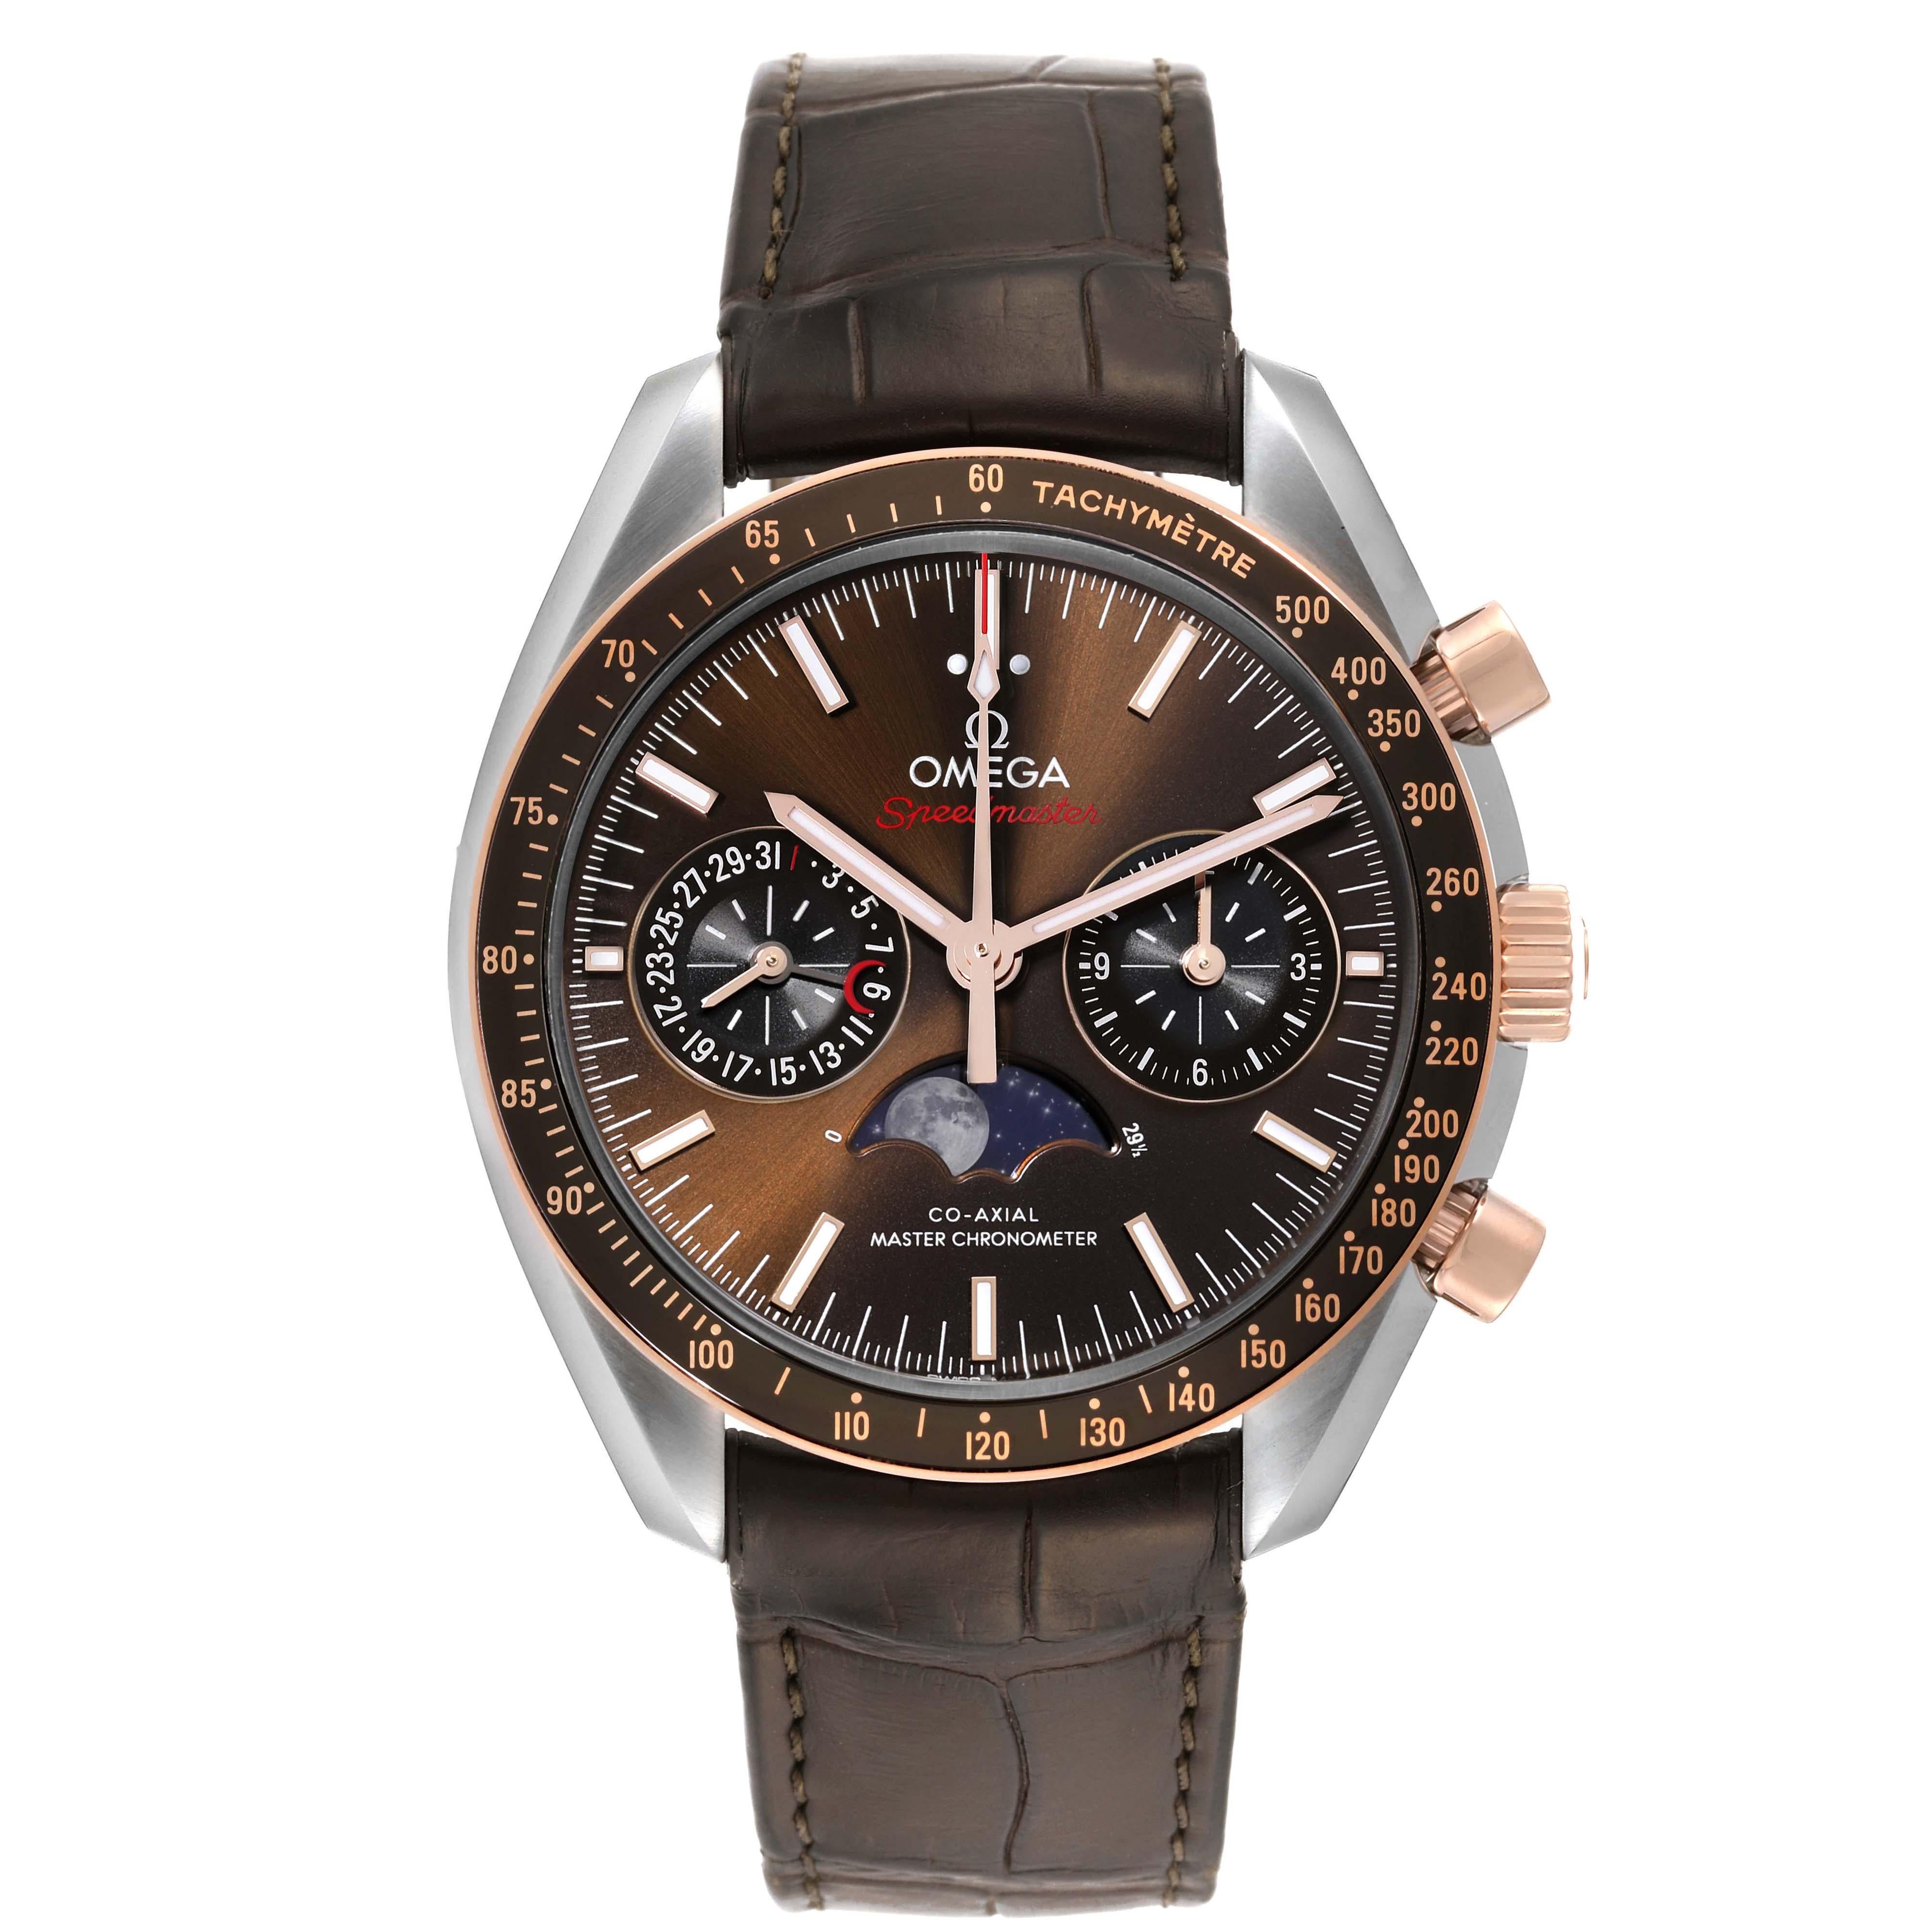 Omega Speedmaster Moonphase Steel Rose Gold Mens Watch 304.23.44.52.13.001 Box Card. Automatic self-winding chronograph movement with column wheel mechanism and Co-Axial Escapement. Silicon balance-spring on free sprung-balance, 2 barrels mounted in